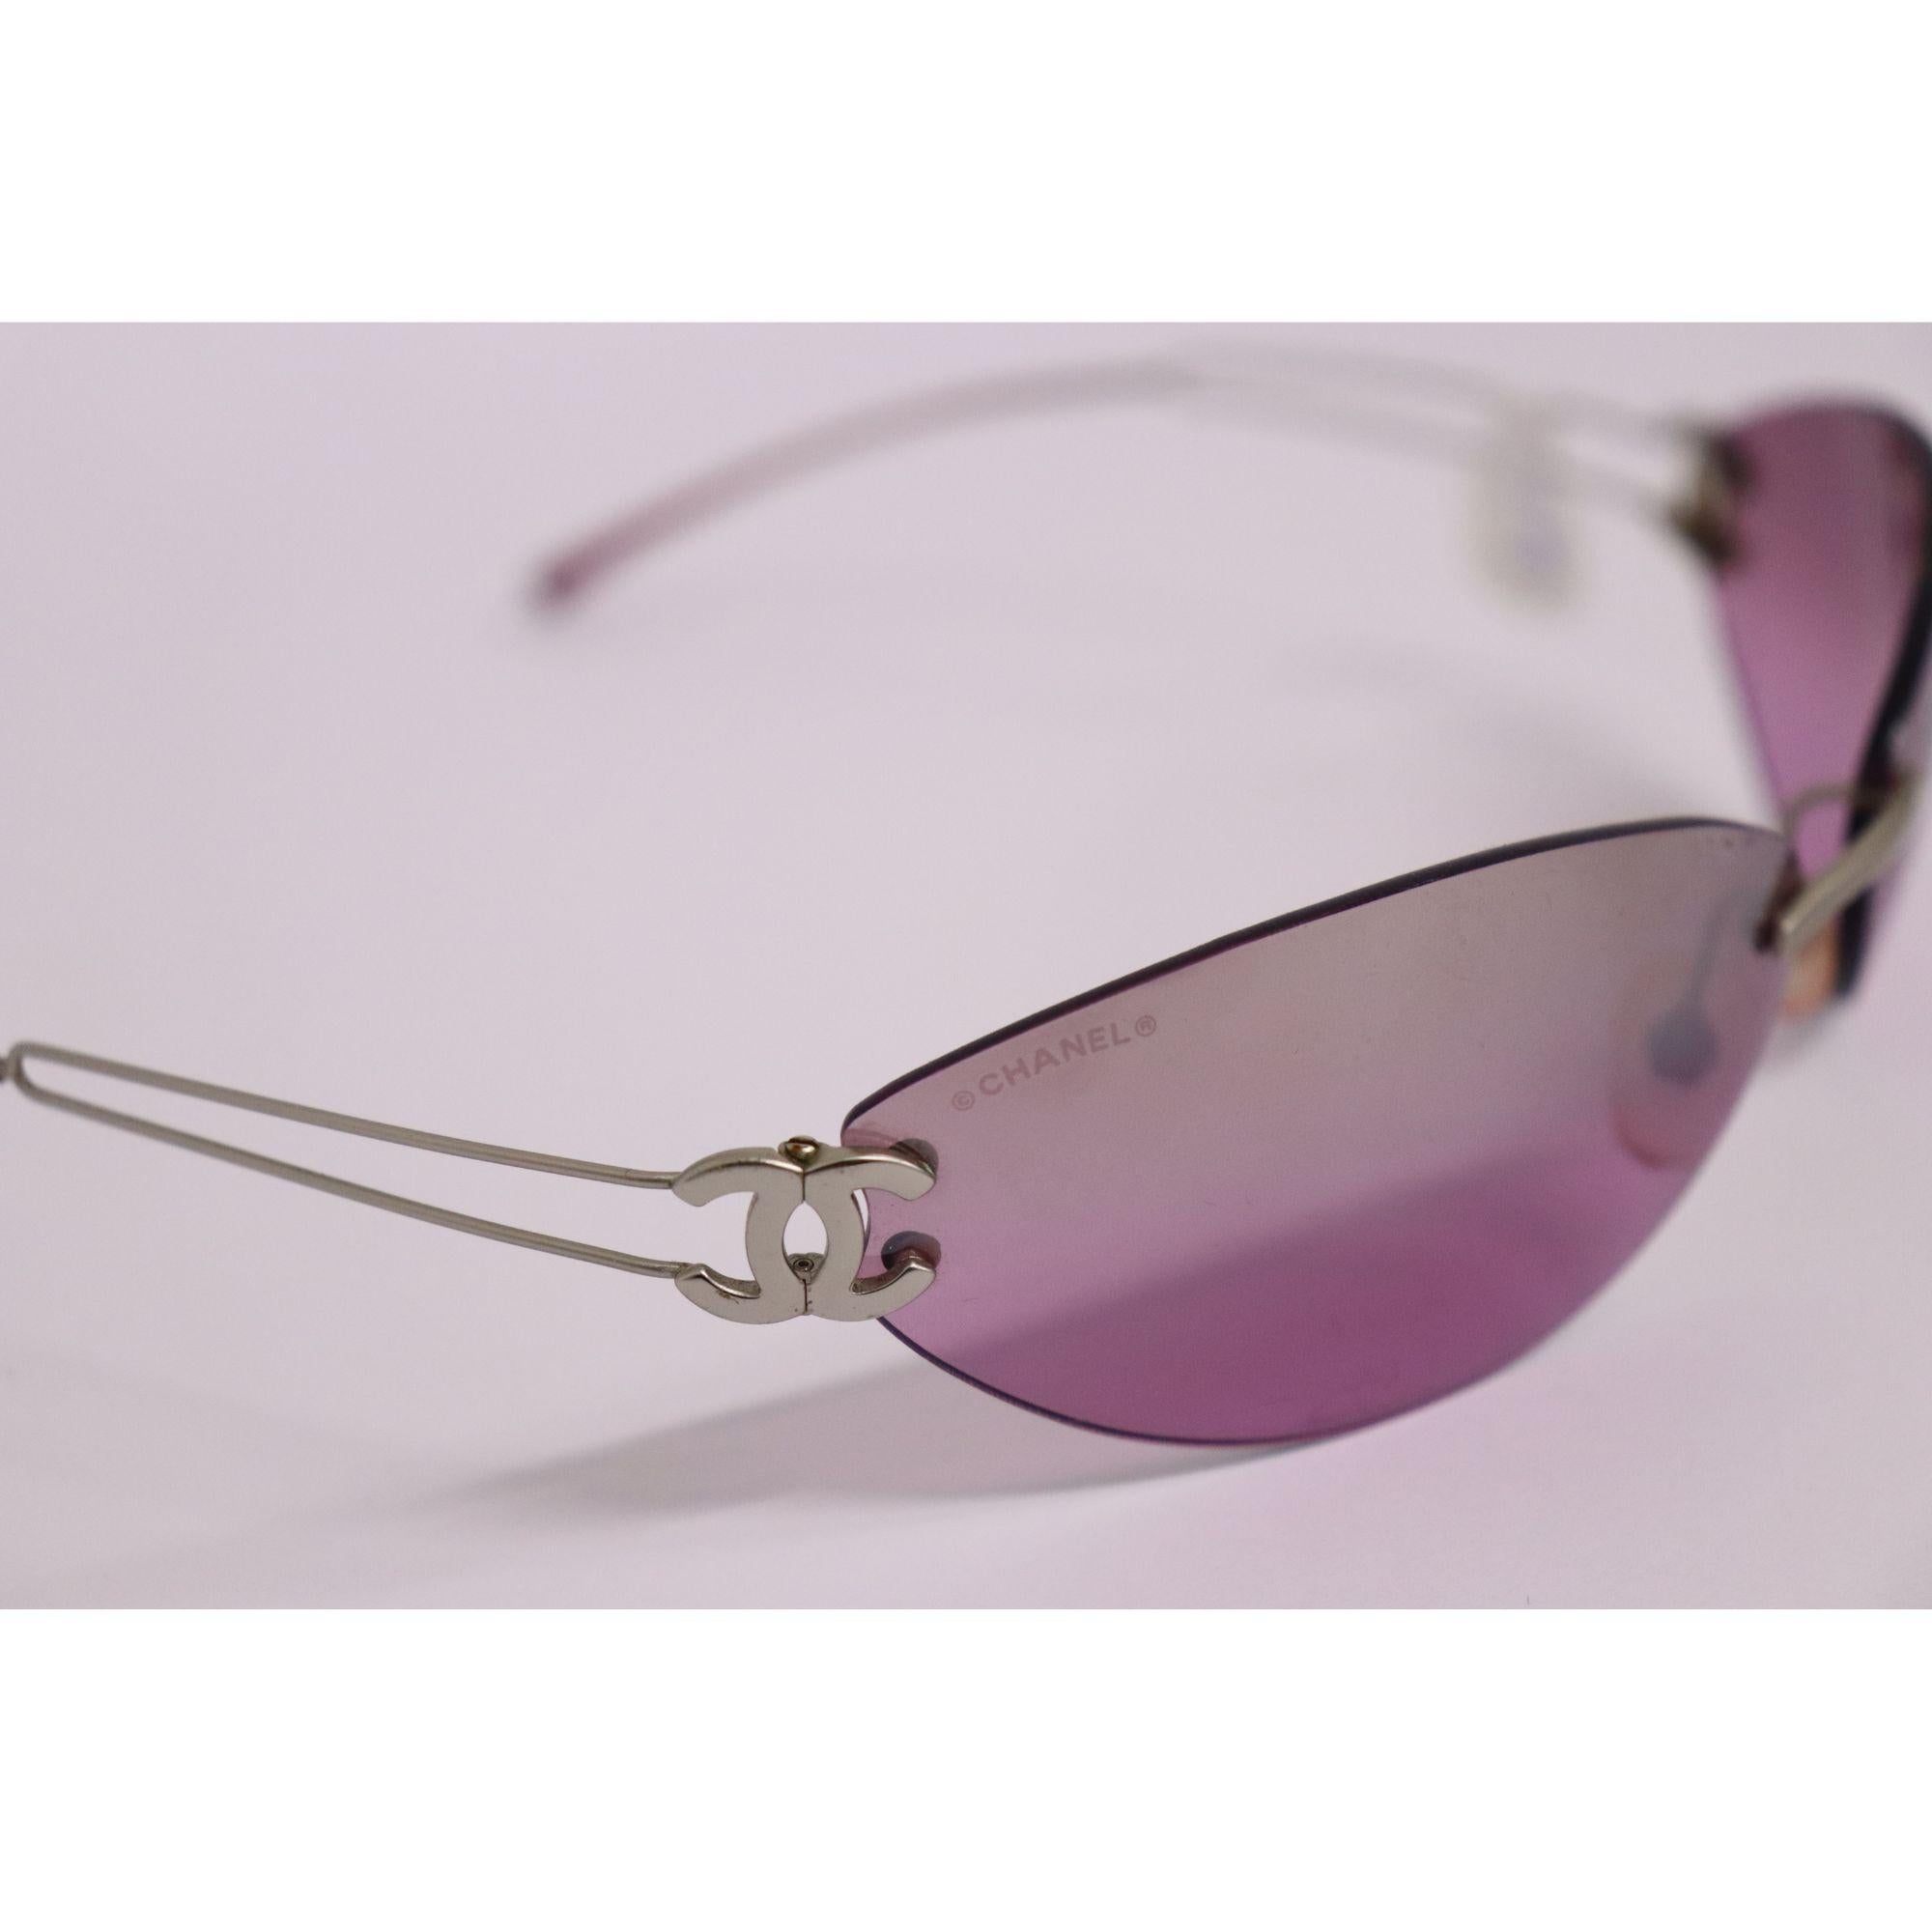 Vintage rimless pink Chanel sunglasses with silver CC. In excellent condition.

Hardware: Silver Metal

Lens: Pink

Size: 731/132/130

Condition
Overall Condition: Minimal signs of use. No scratches on lense

Extras
Includes original box